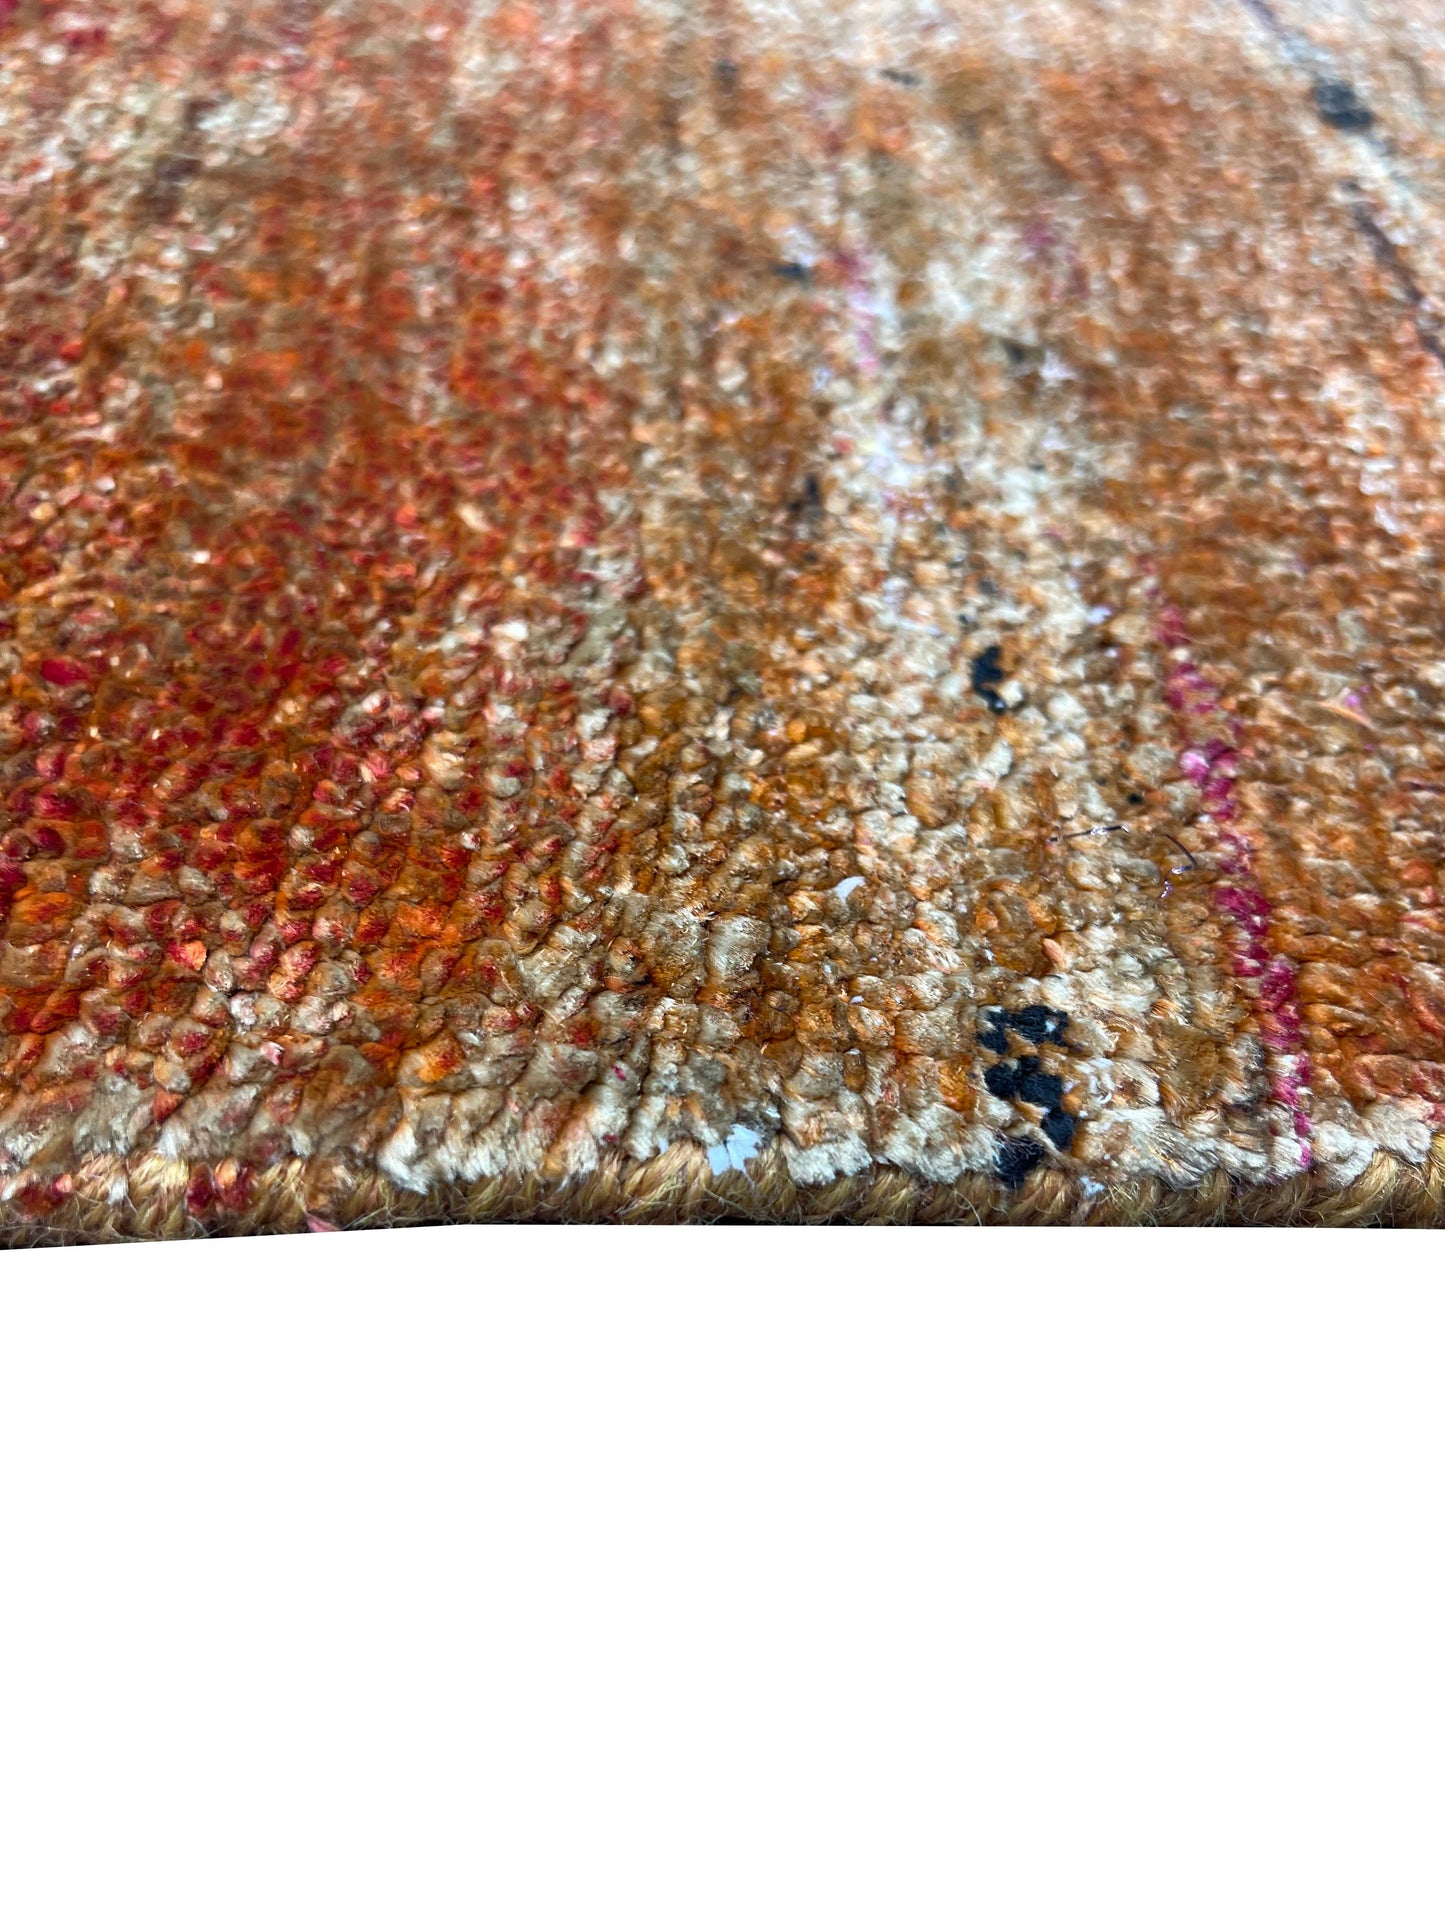 Get trendy with Orange Sari Silk Textured Modern Handknotted Area Rug 5.10x9.0ft 178x274Cms - Modern Rugs available at Jaipur Oriental Rugs. Grab yours for $3780.00 today!